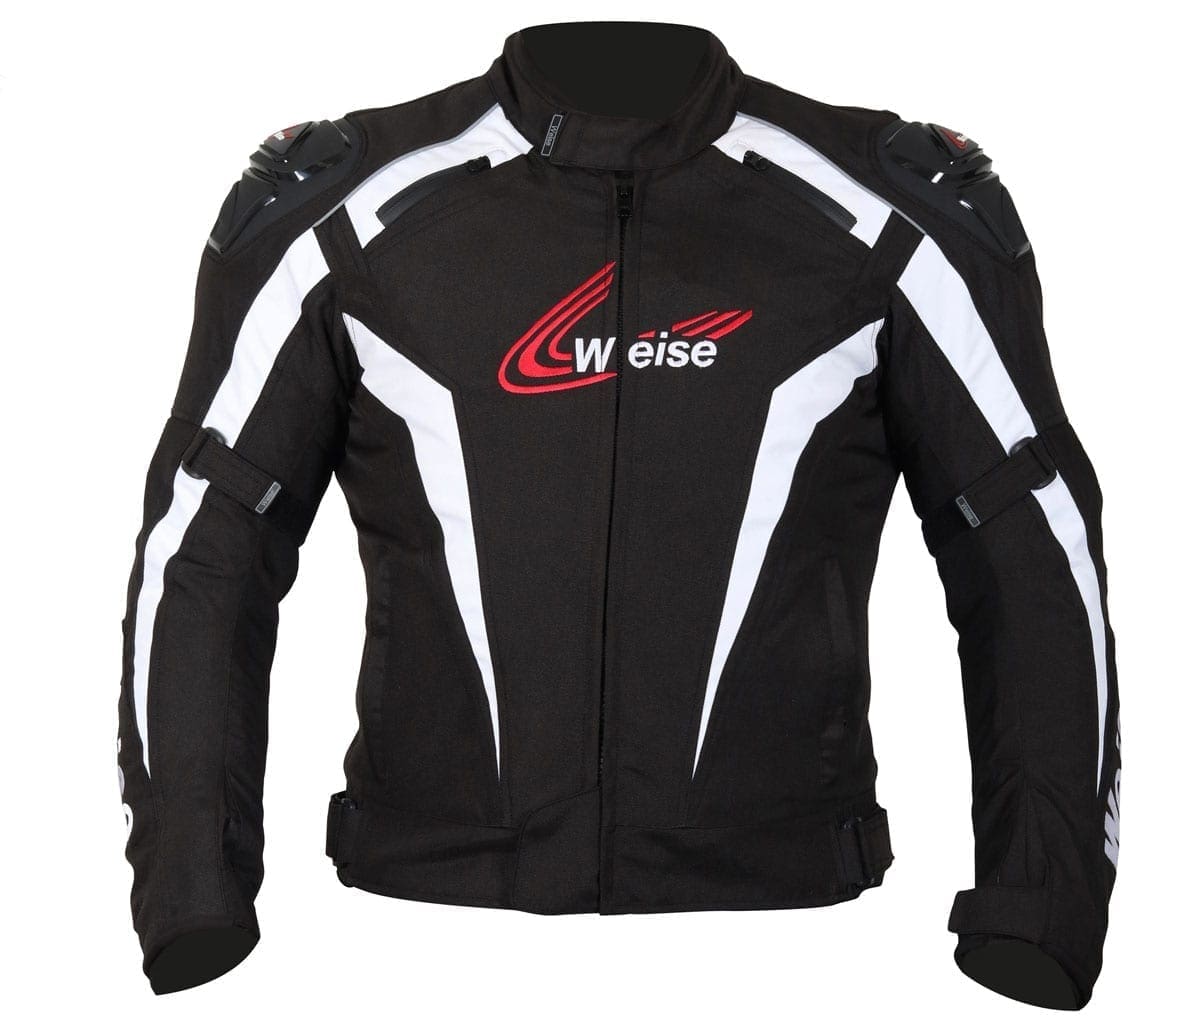 Win a Weise Ascari jacket worth £149.99 with CMM!